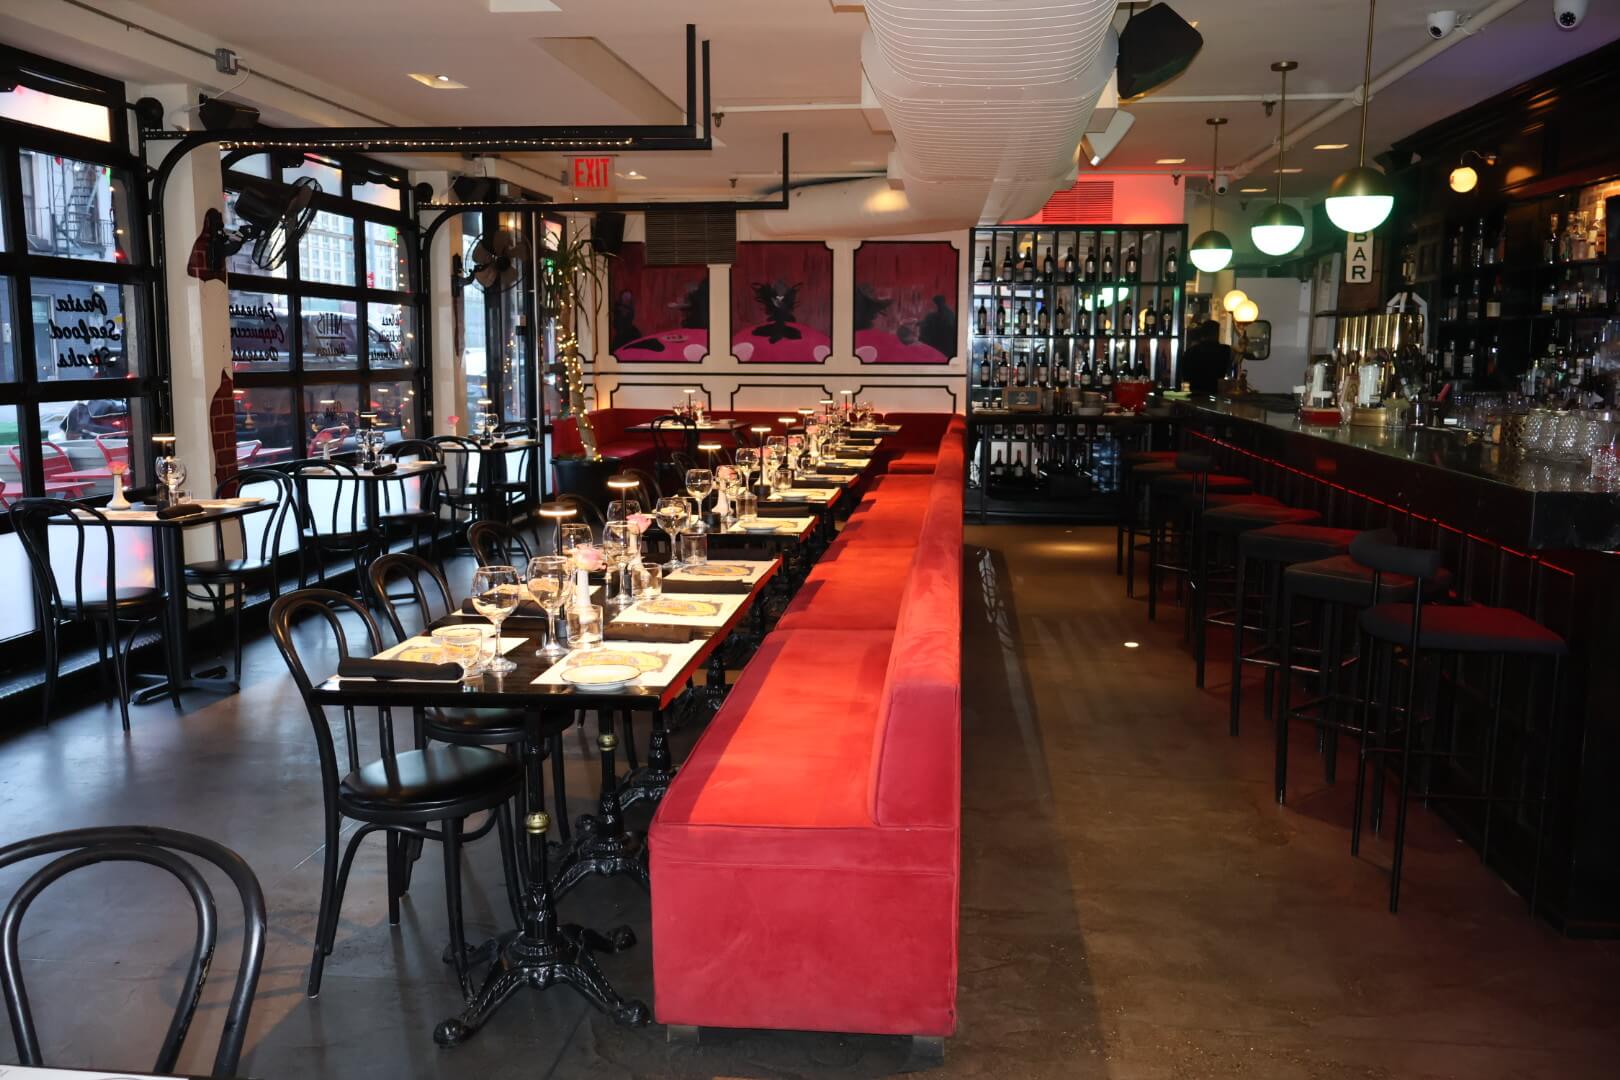 Long row of black tables and chairs placed against red booth with full bar on the right